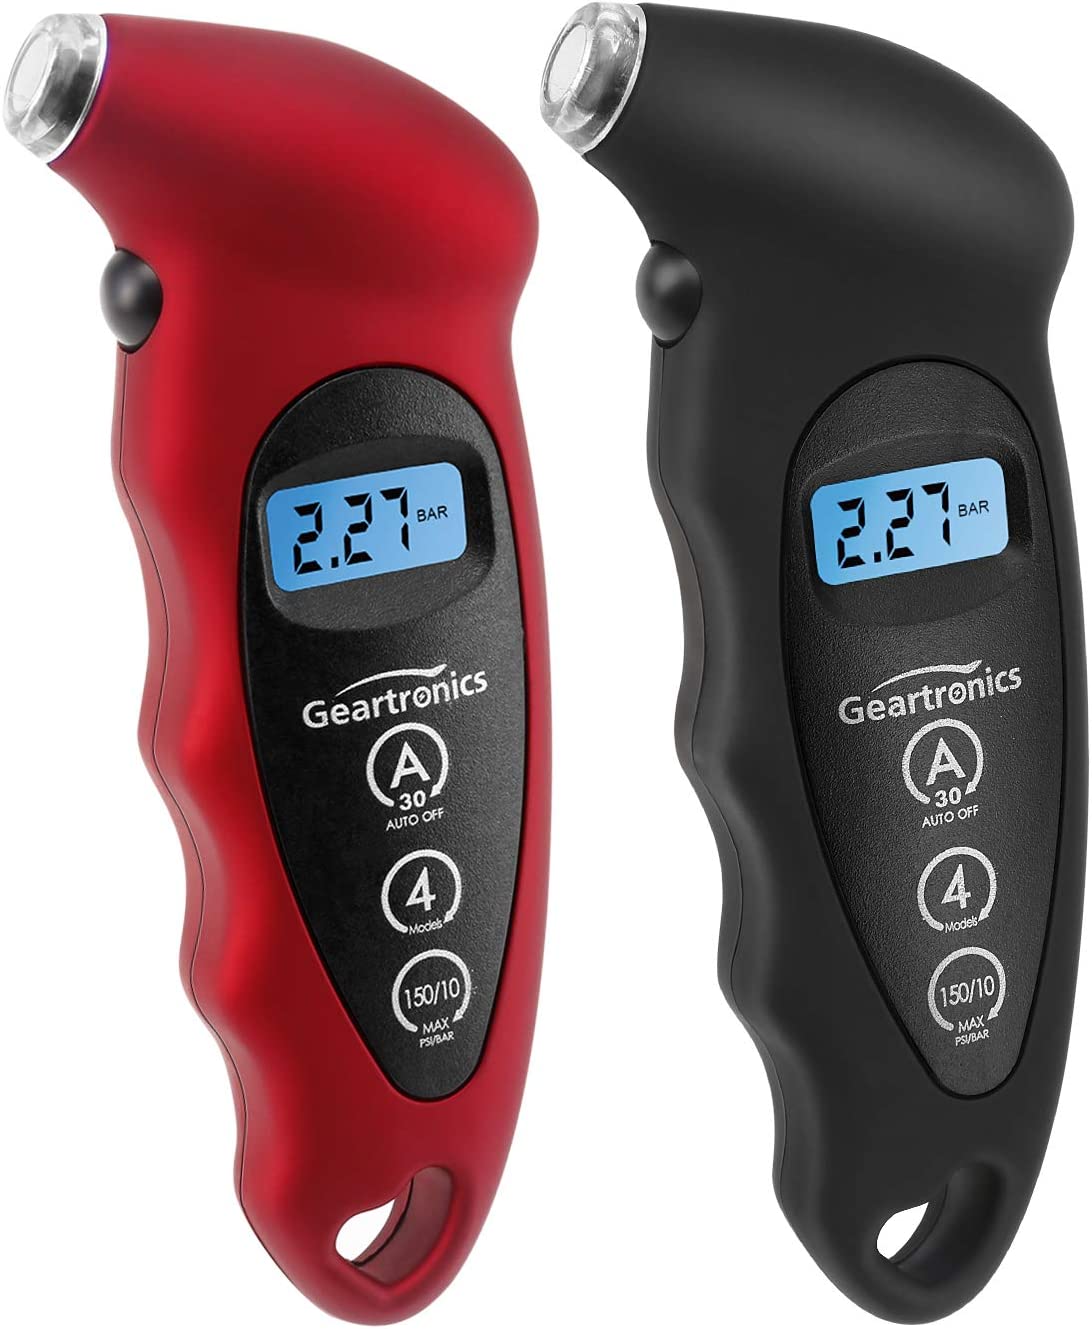 Geartronics Tight Seal Automatic Off Tire Pressure Gauge, 2-Pack